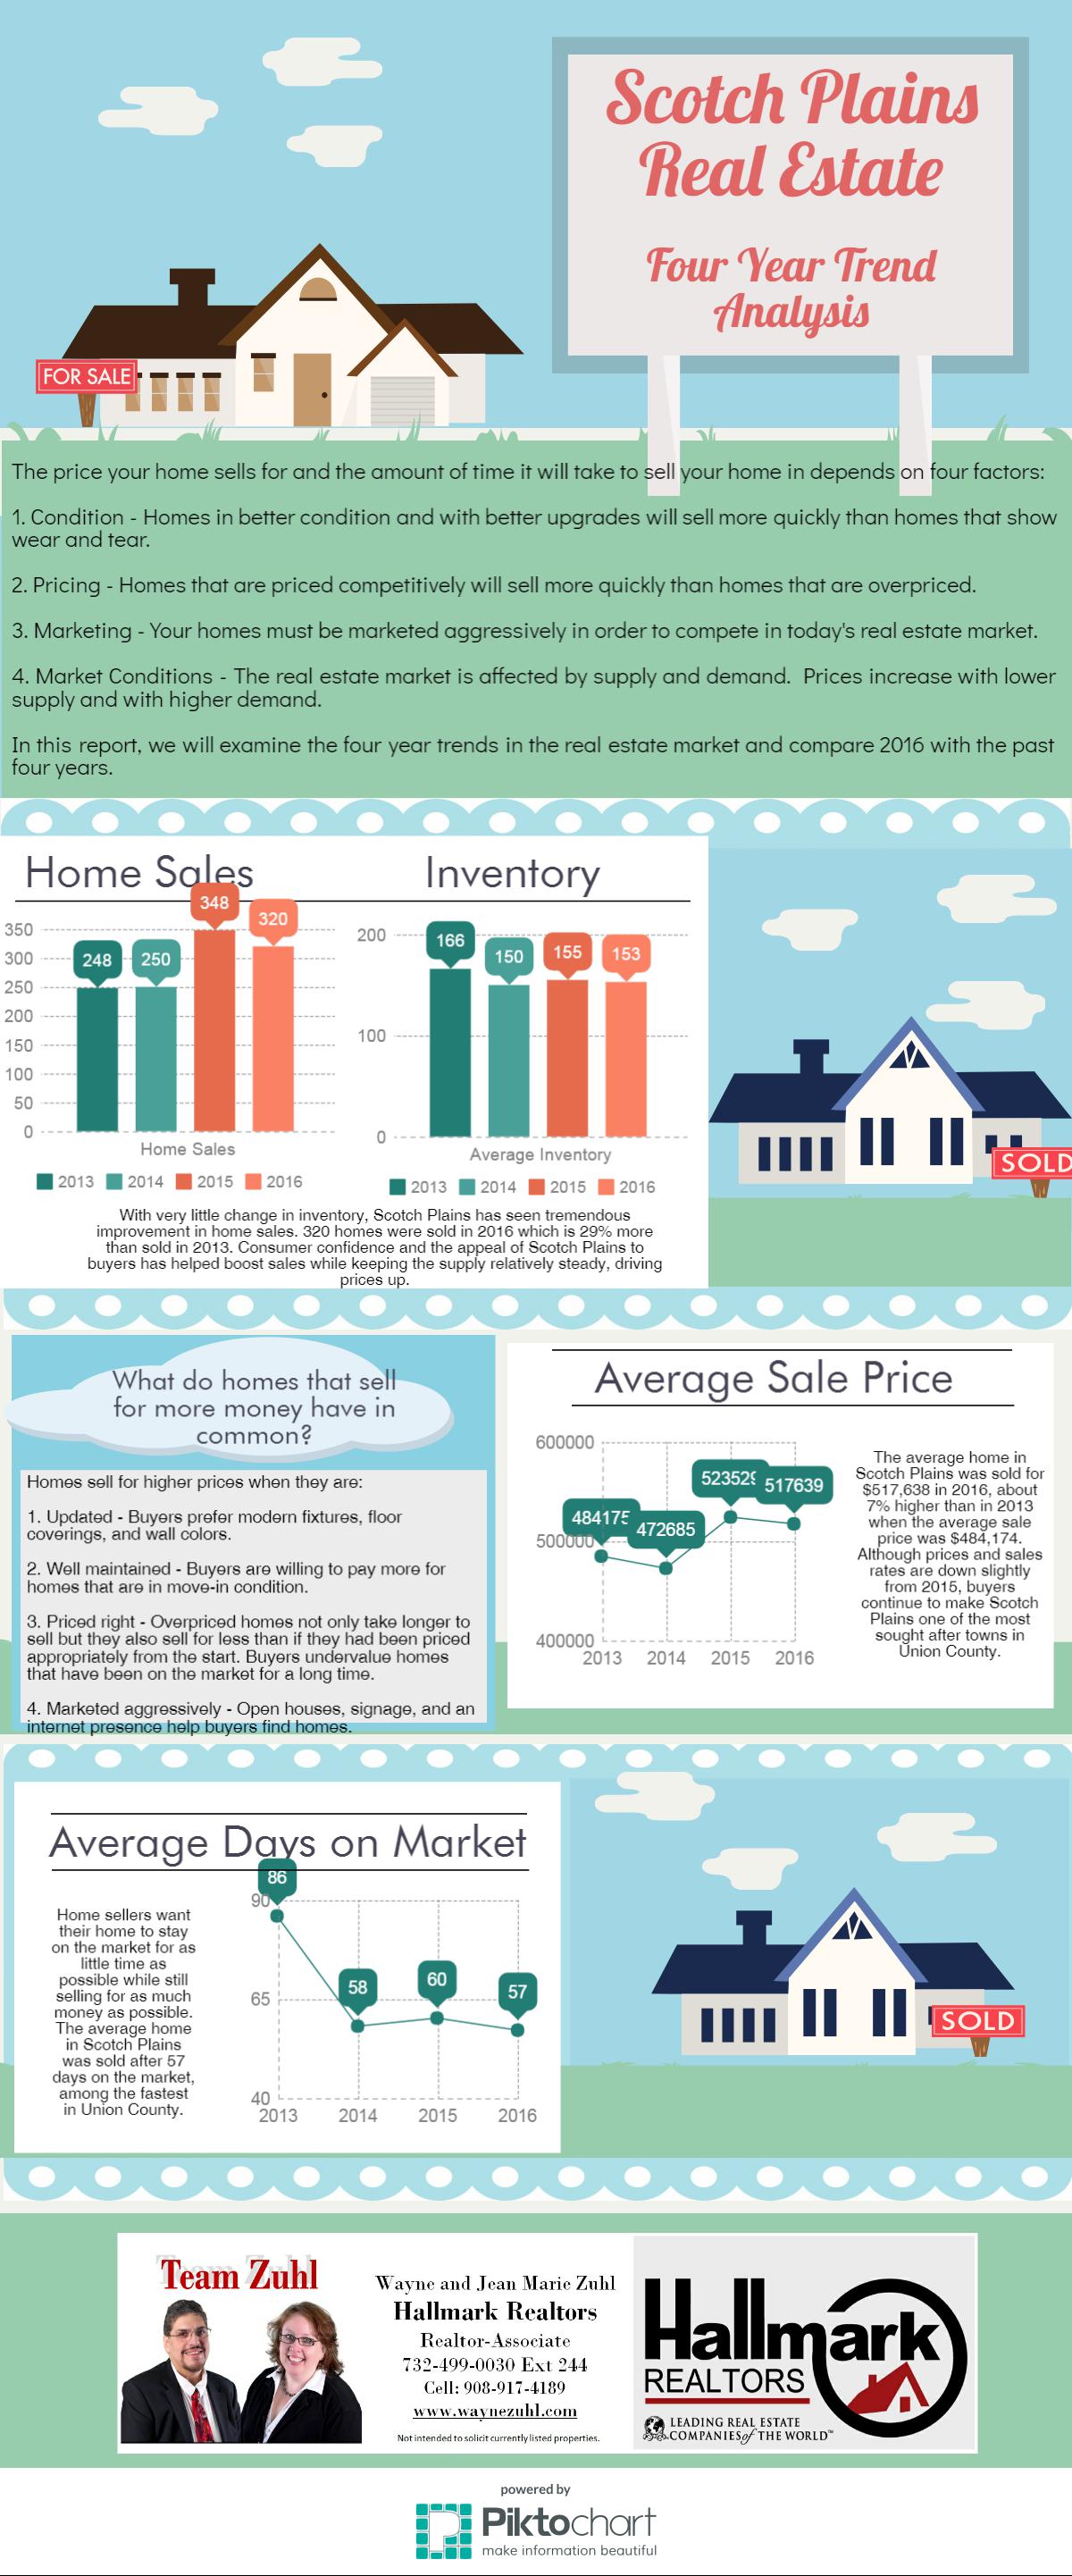 Scotch Plains year end real estate trend analysis